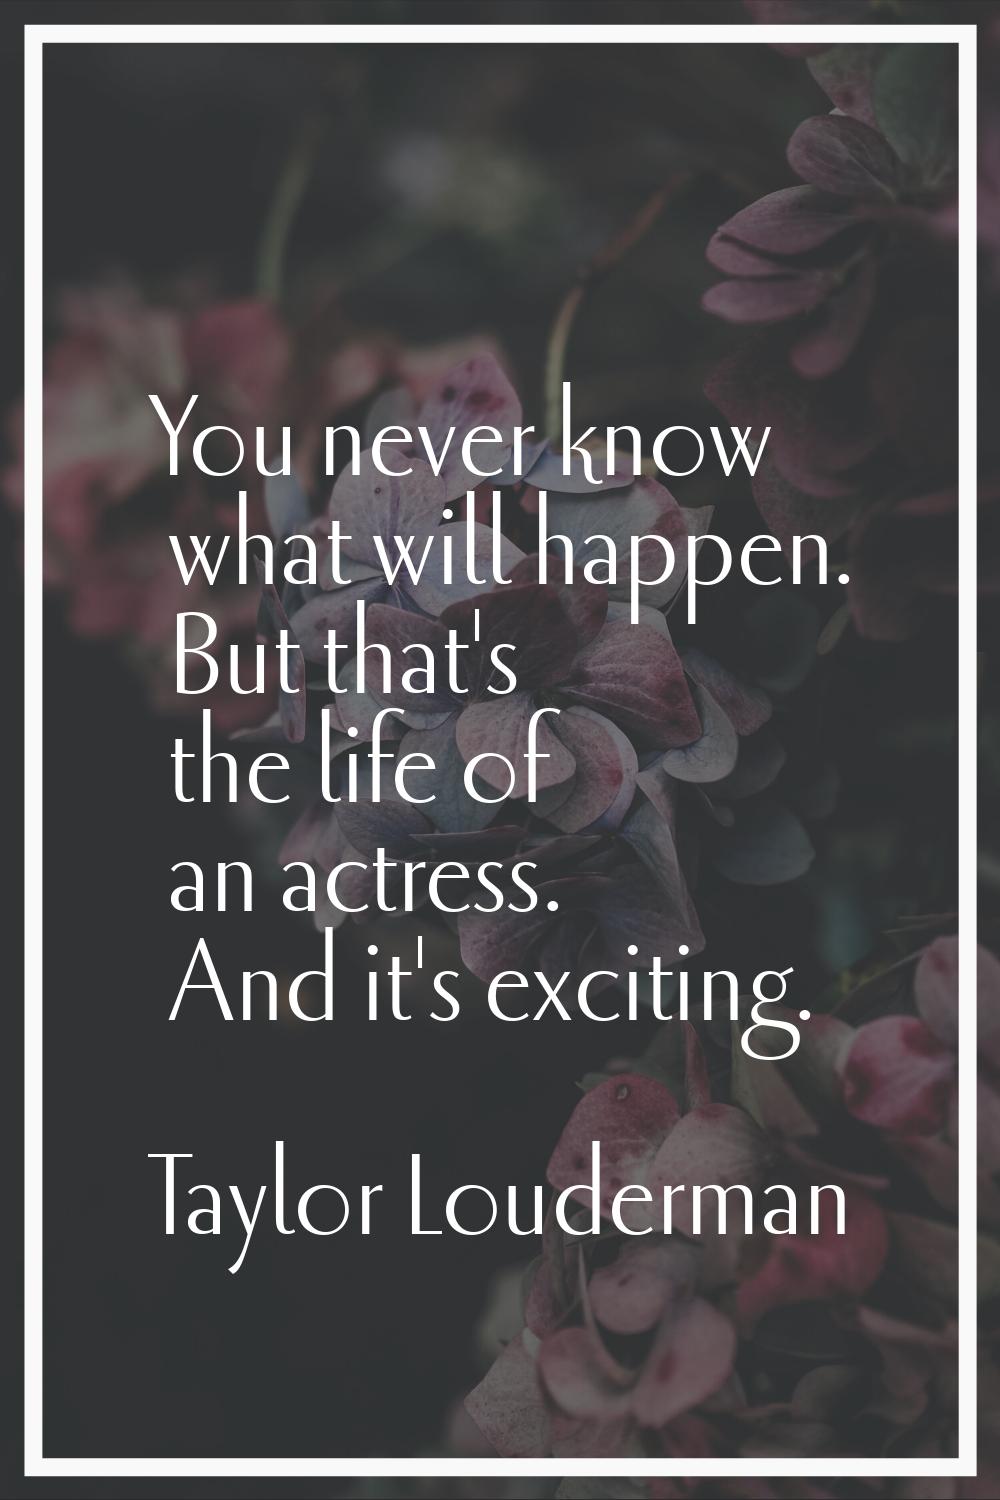 You never know what will happen. But that's the life of an actress. And it's exciting.